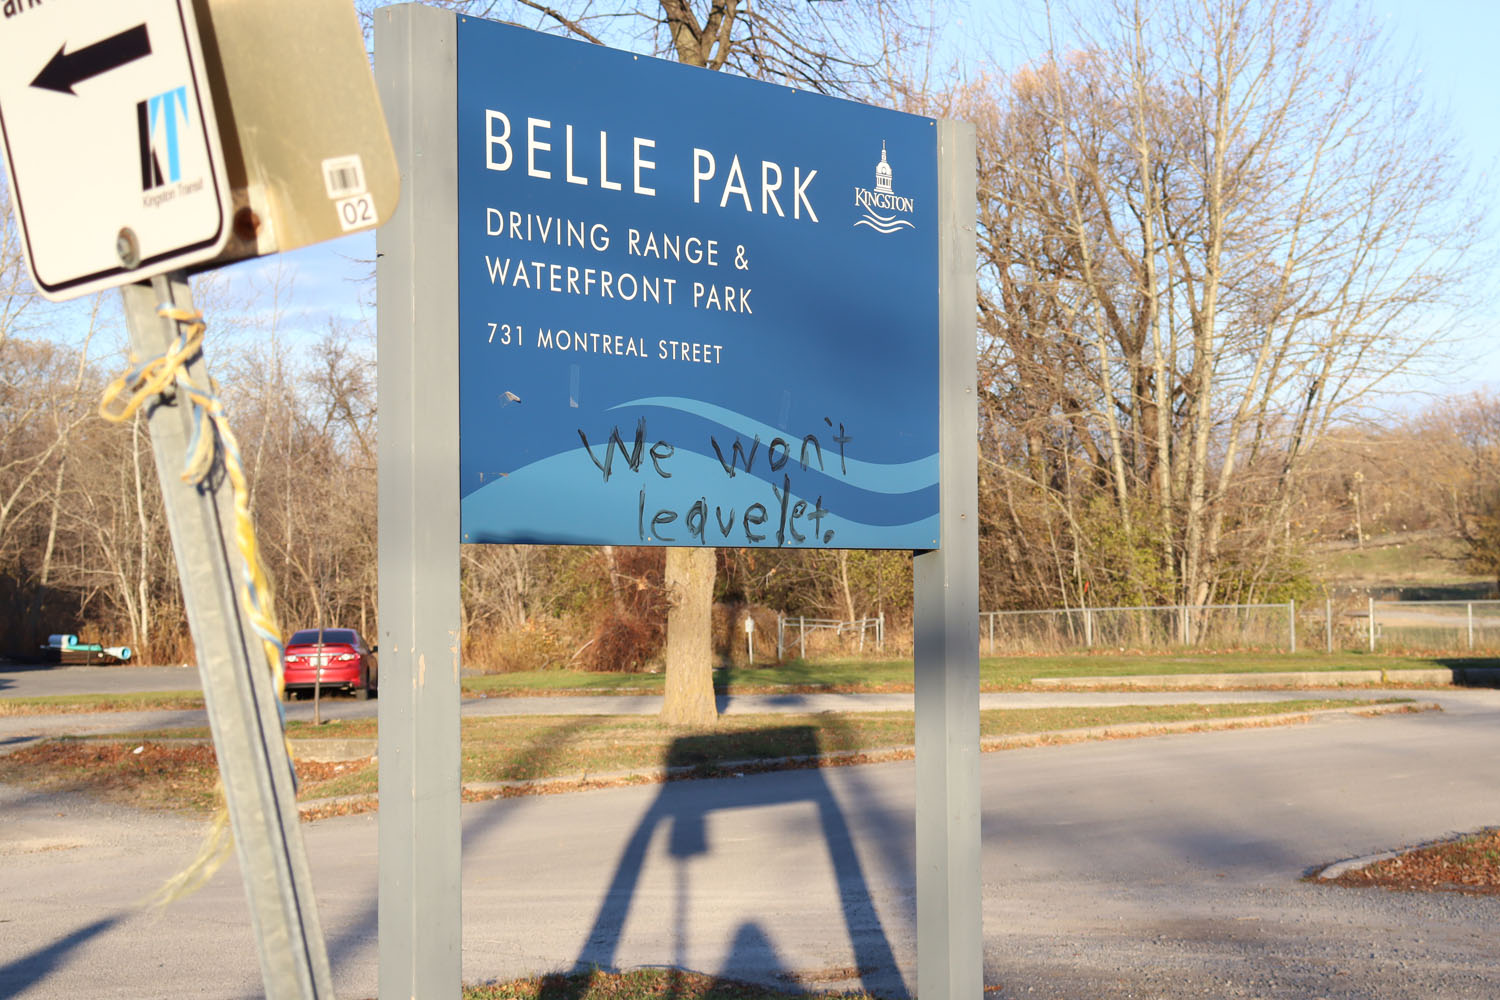 Image of Belle Park where people experiencing homelessness lived in the summer. The words "we won't leave yet" has been written on the sign.